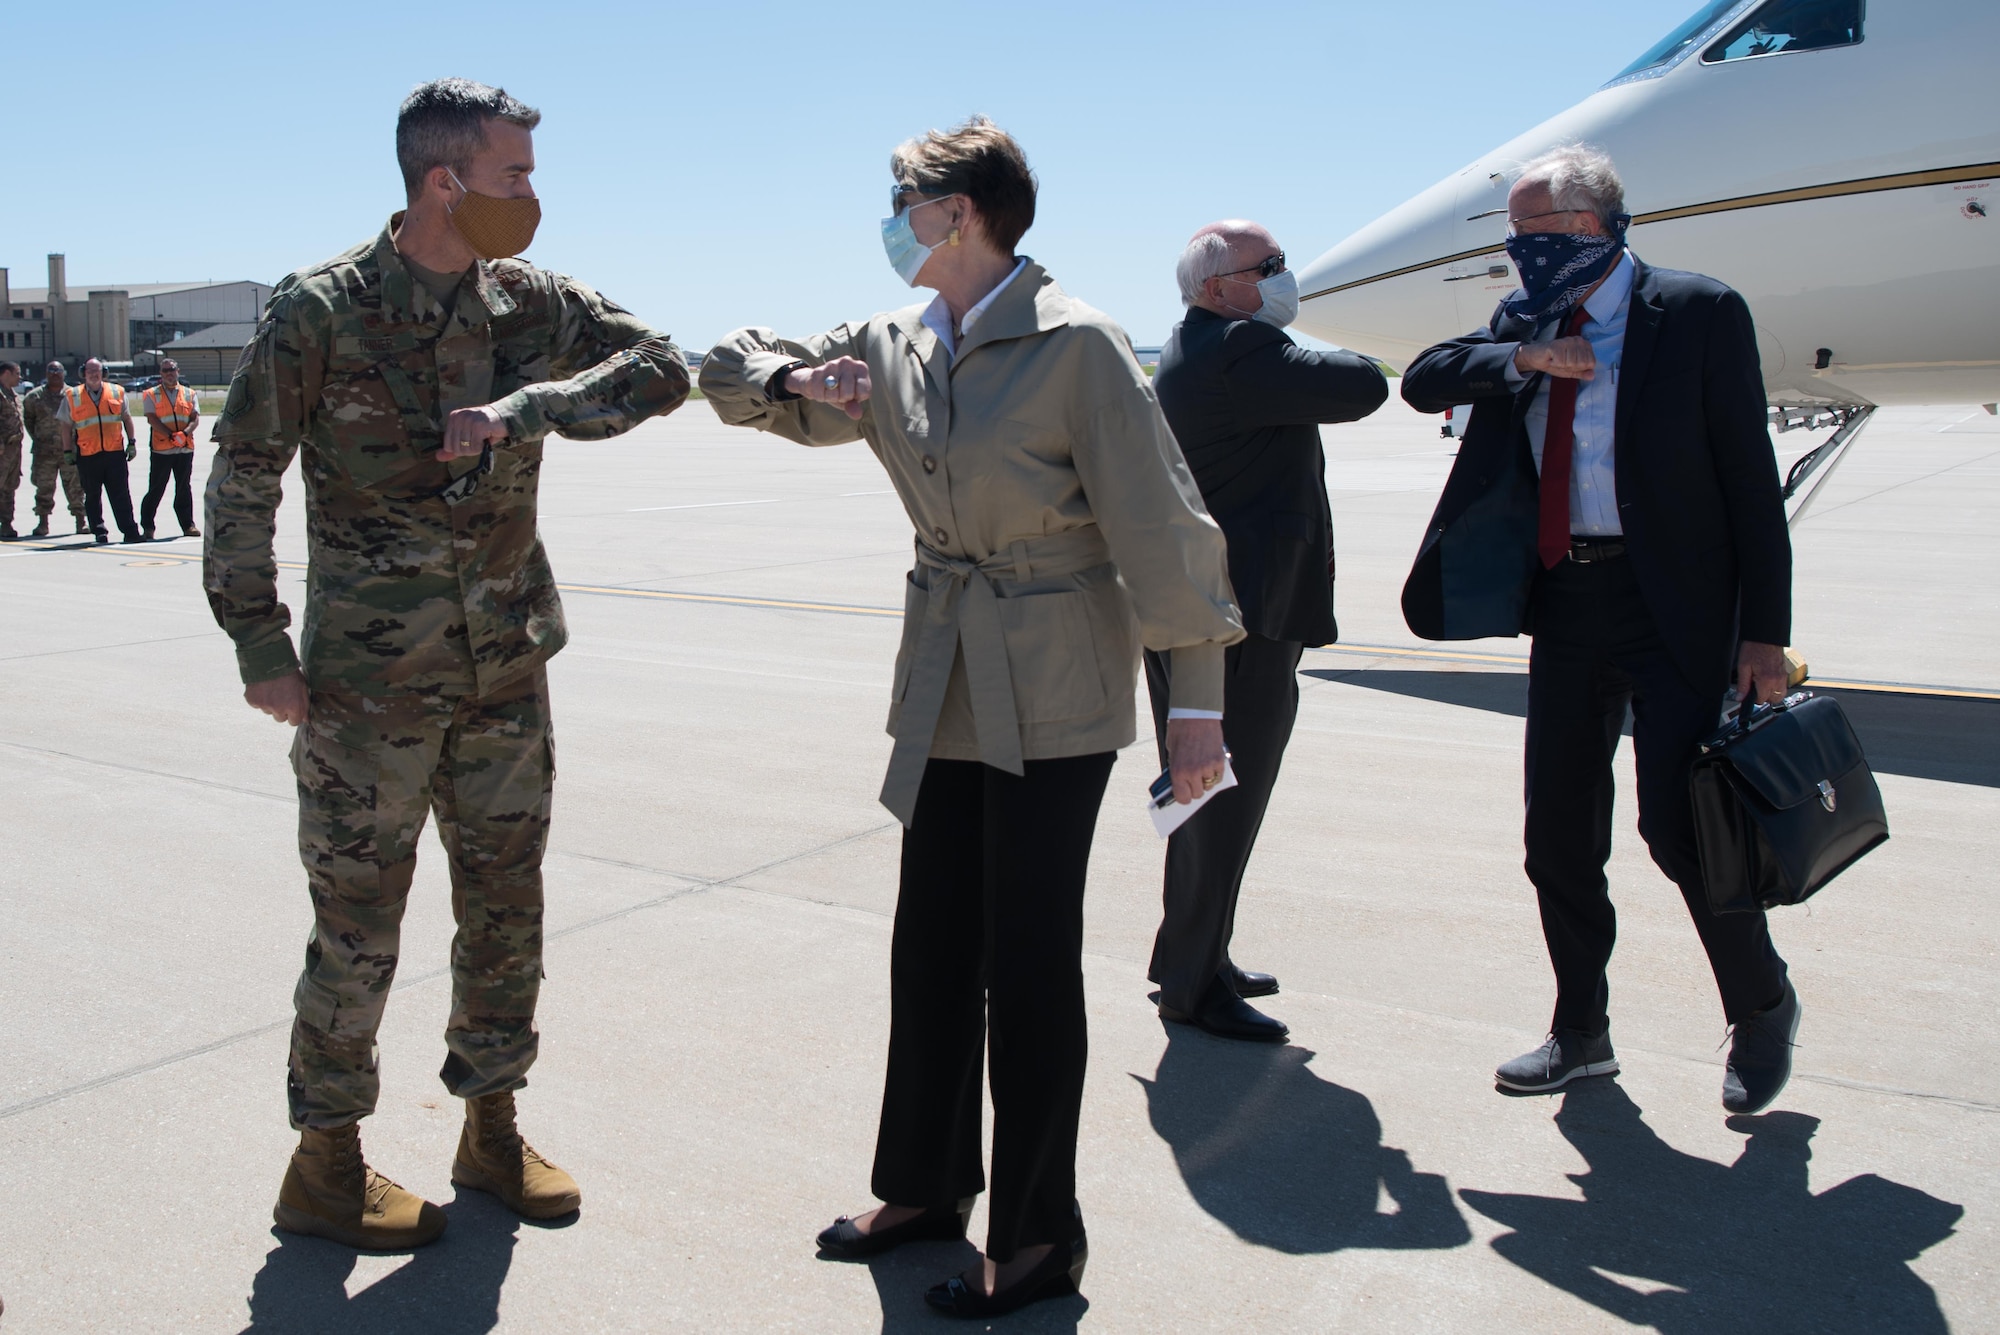 Col. Richard Tanner, 22nd Air Refueling Wing commander, greets Secretary of the Air Force Barbara Barrett, as U.S. Rep. Ron Estes greets U.S. Sen. Jerry Moran, upon their arrival June 10, 2020, at McConnell Air Force Base, Kansas. Barrett visited Team McConnell to interact with Airmen and receive a comprehensive KC-46A Pegasus immersion. (U.S. Air Force photo by Senior Airman Alexi Bosarge)